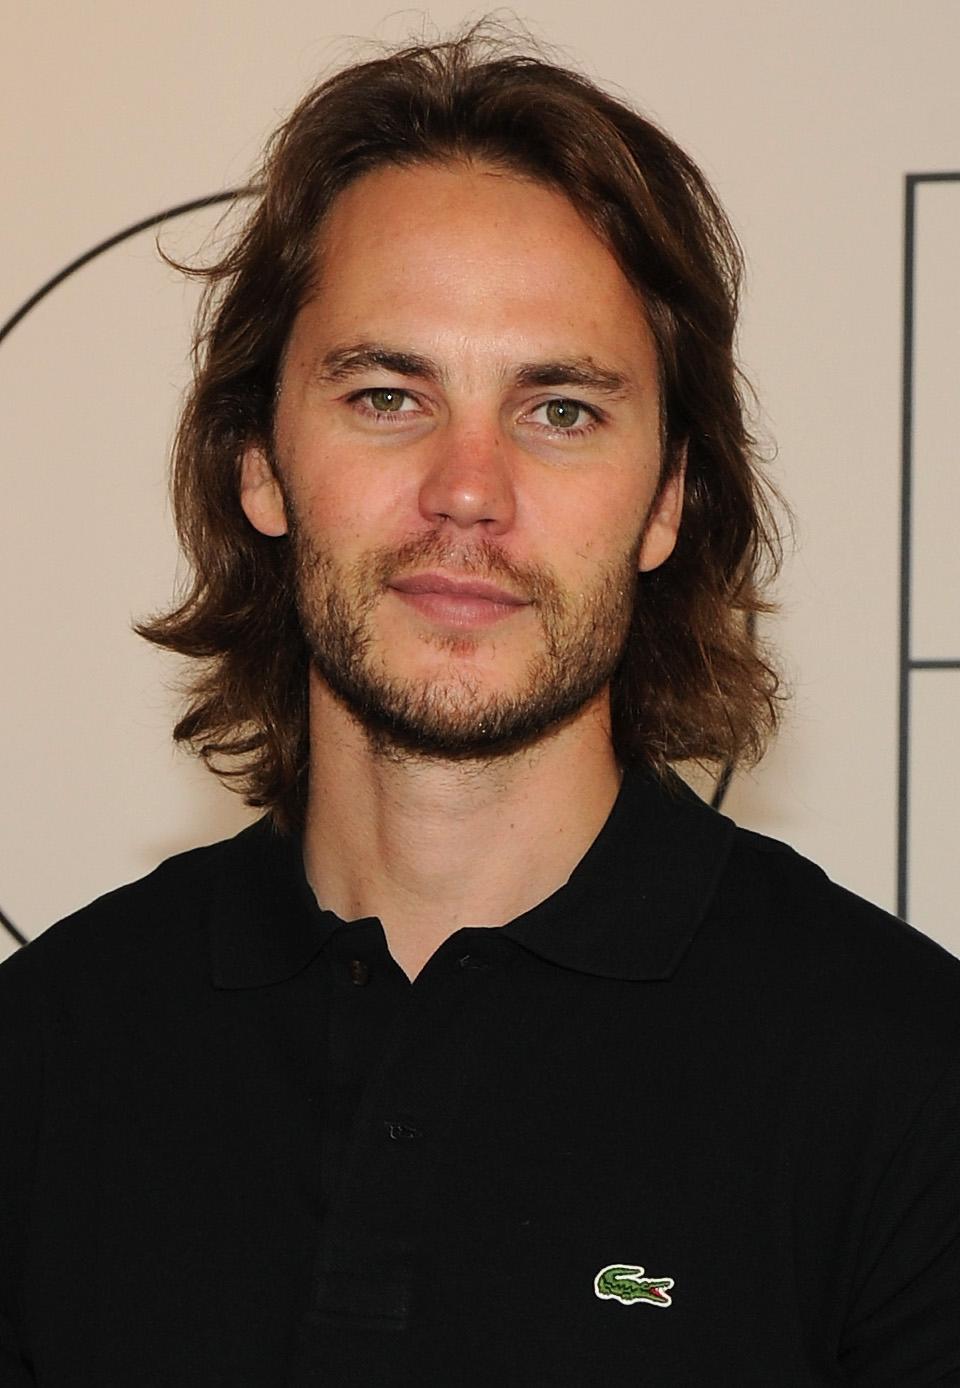 Actor Taylor Kitsch on Oct. 23, 2014 in New York City. (Bryan Bedder/Getty Images/GQ)